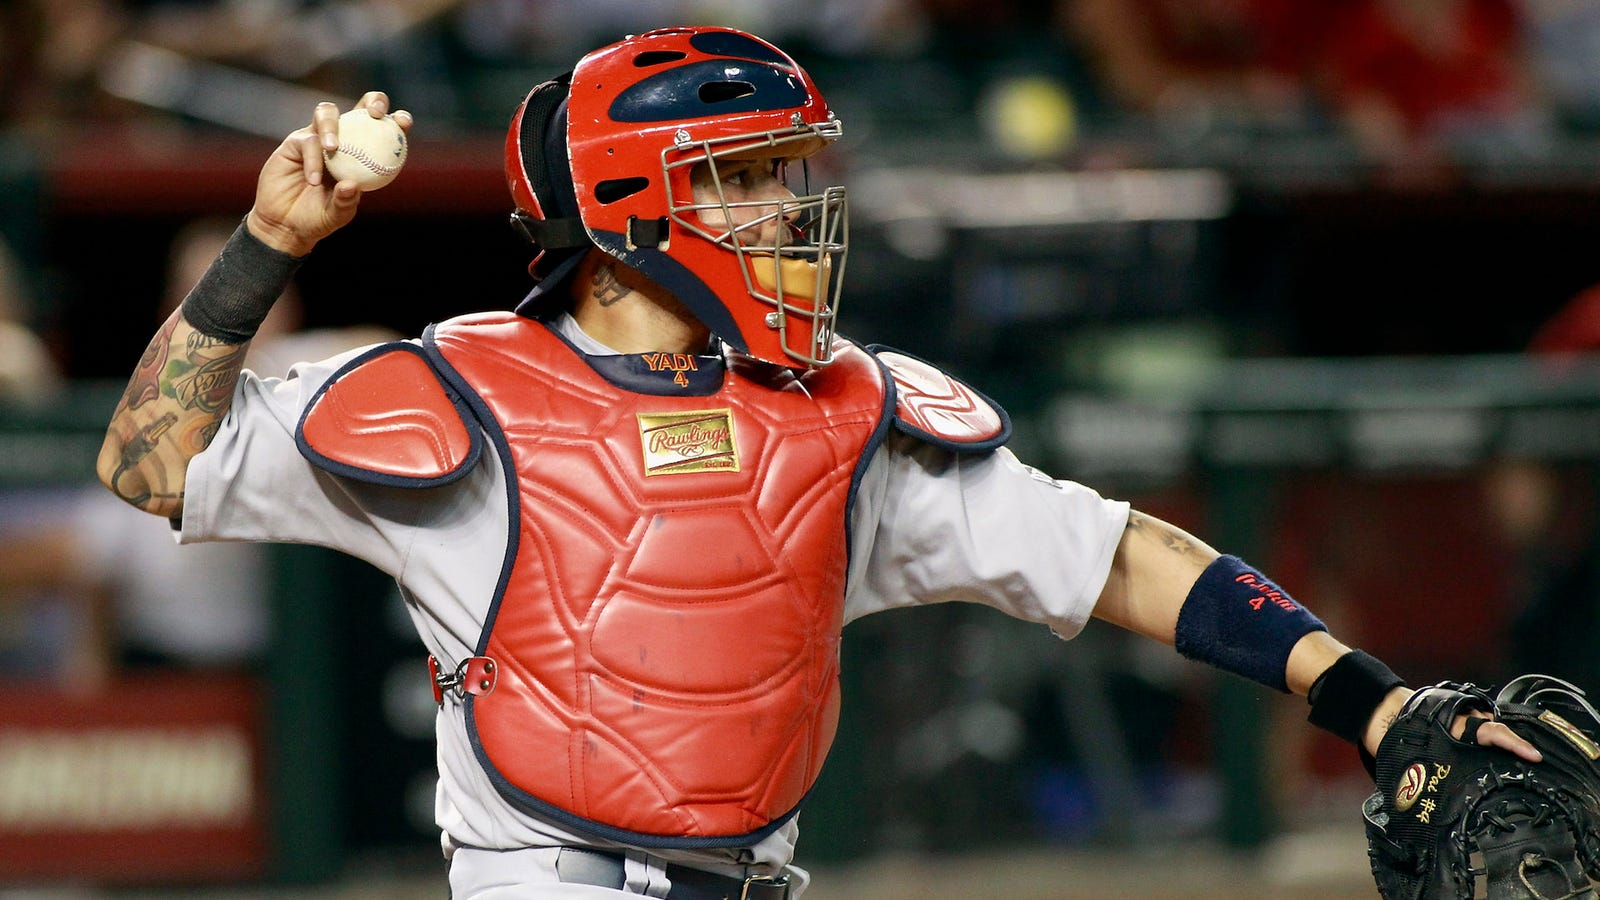 Yadier Molina Will Technically Now Be The Highest-Paid Catcher In Baseball